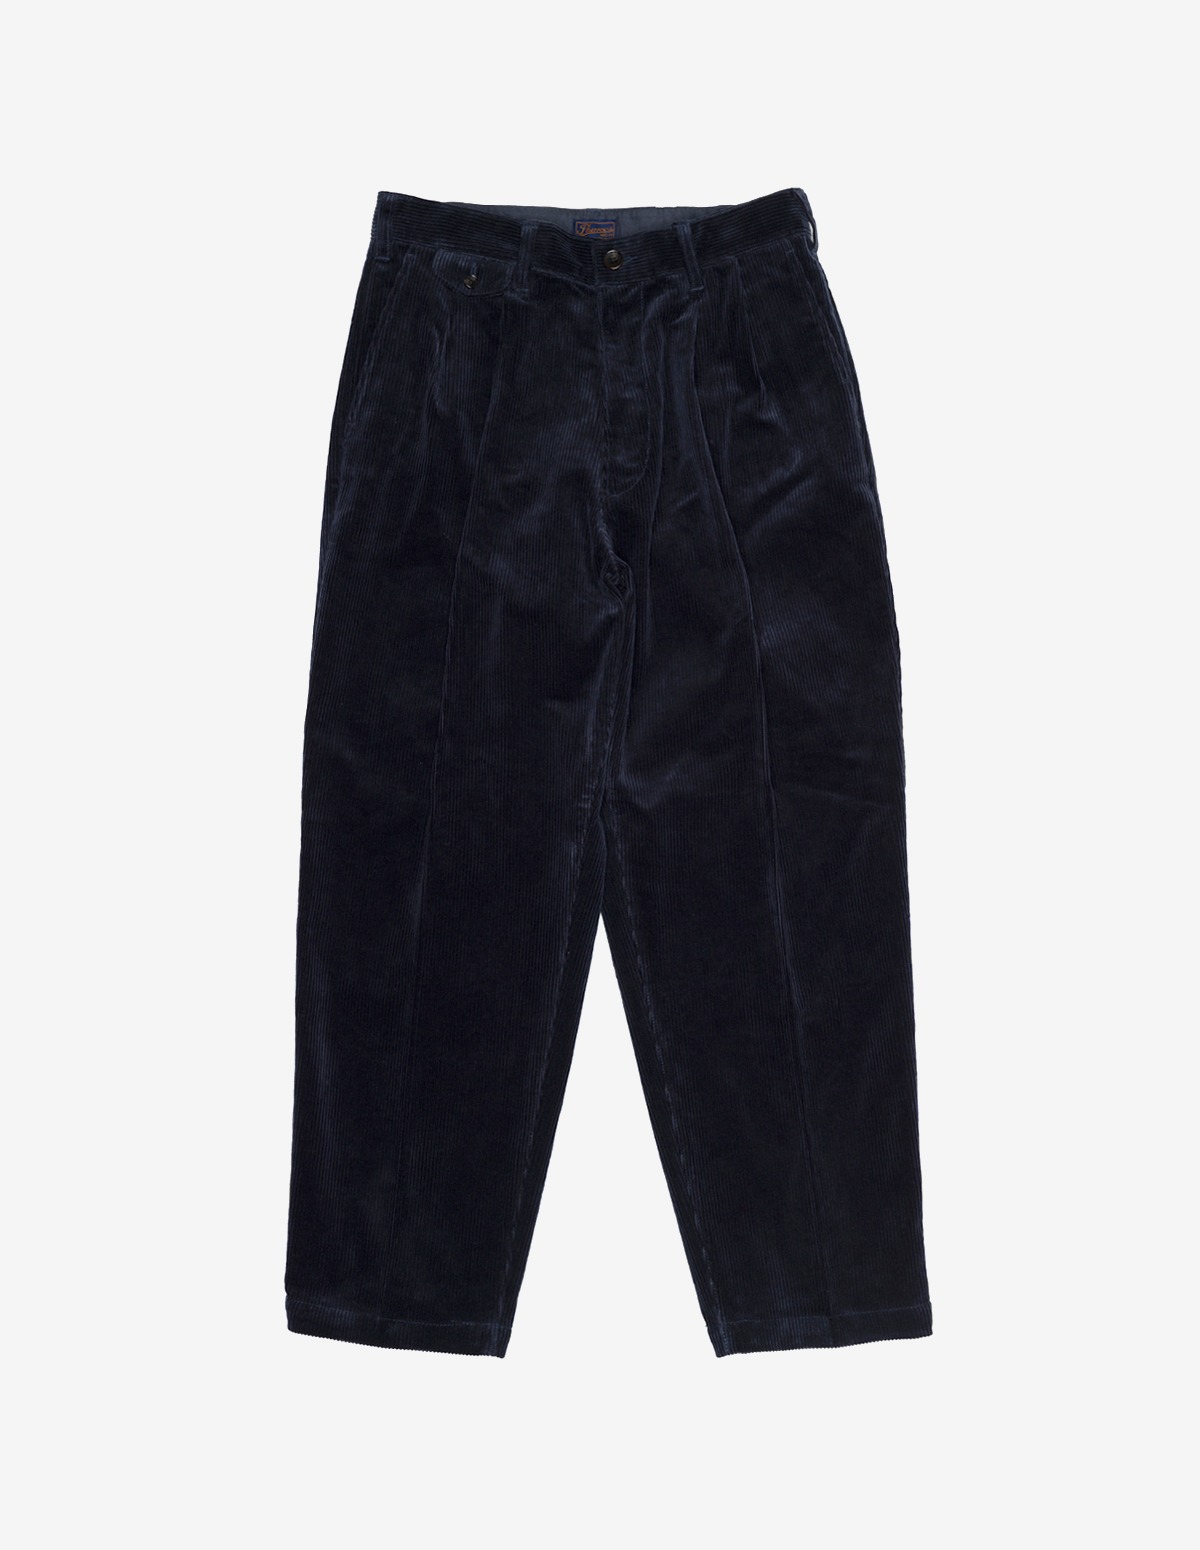 22W-PTTP1 Two-tuck Tapered Pants